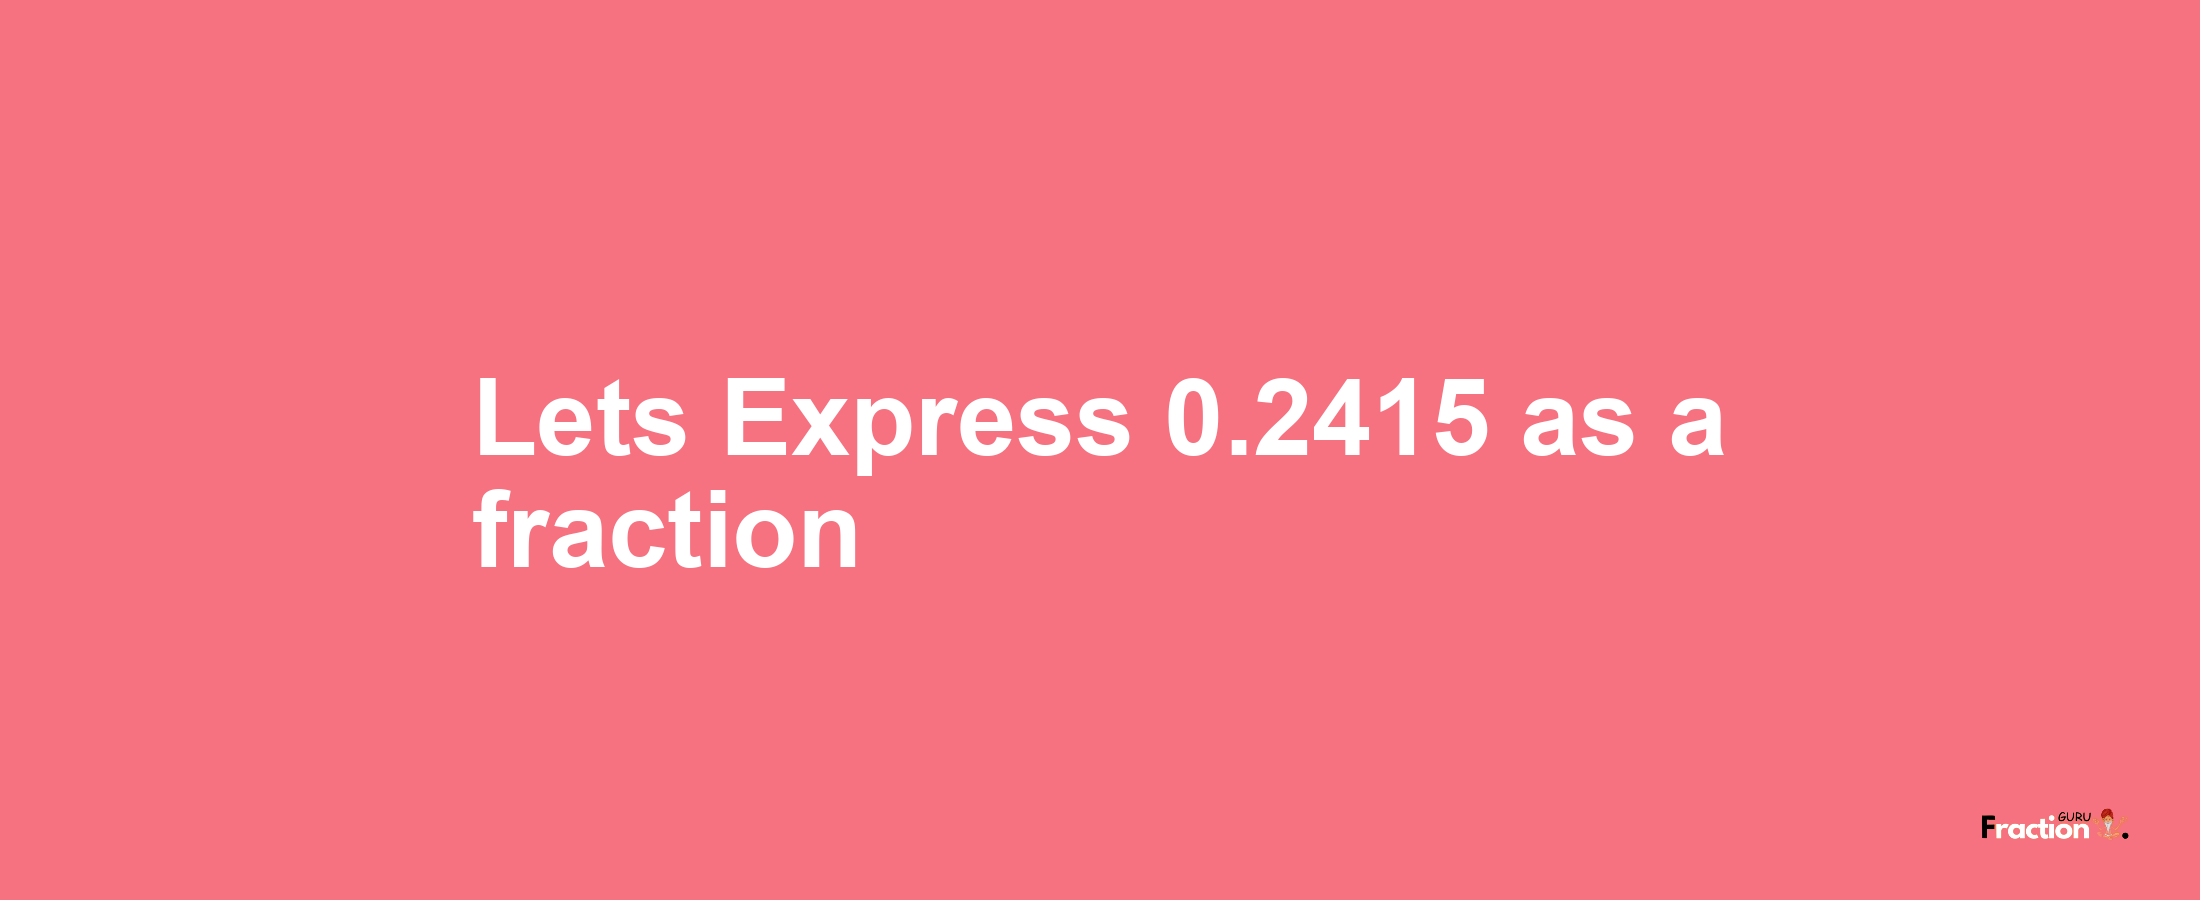 Lets Express 0.2415 as afraction